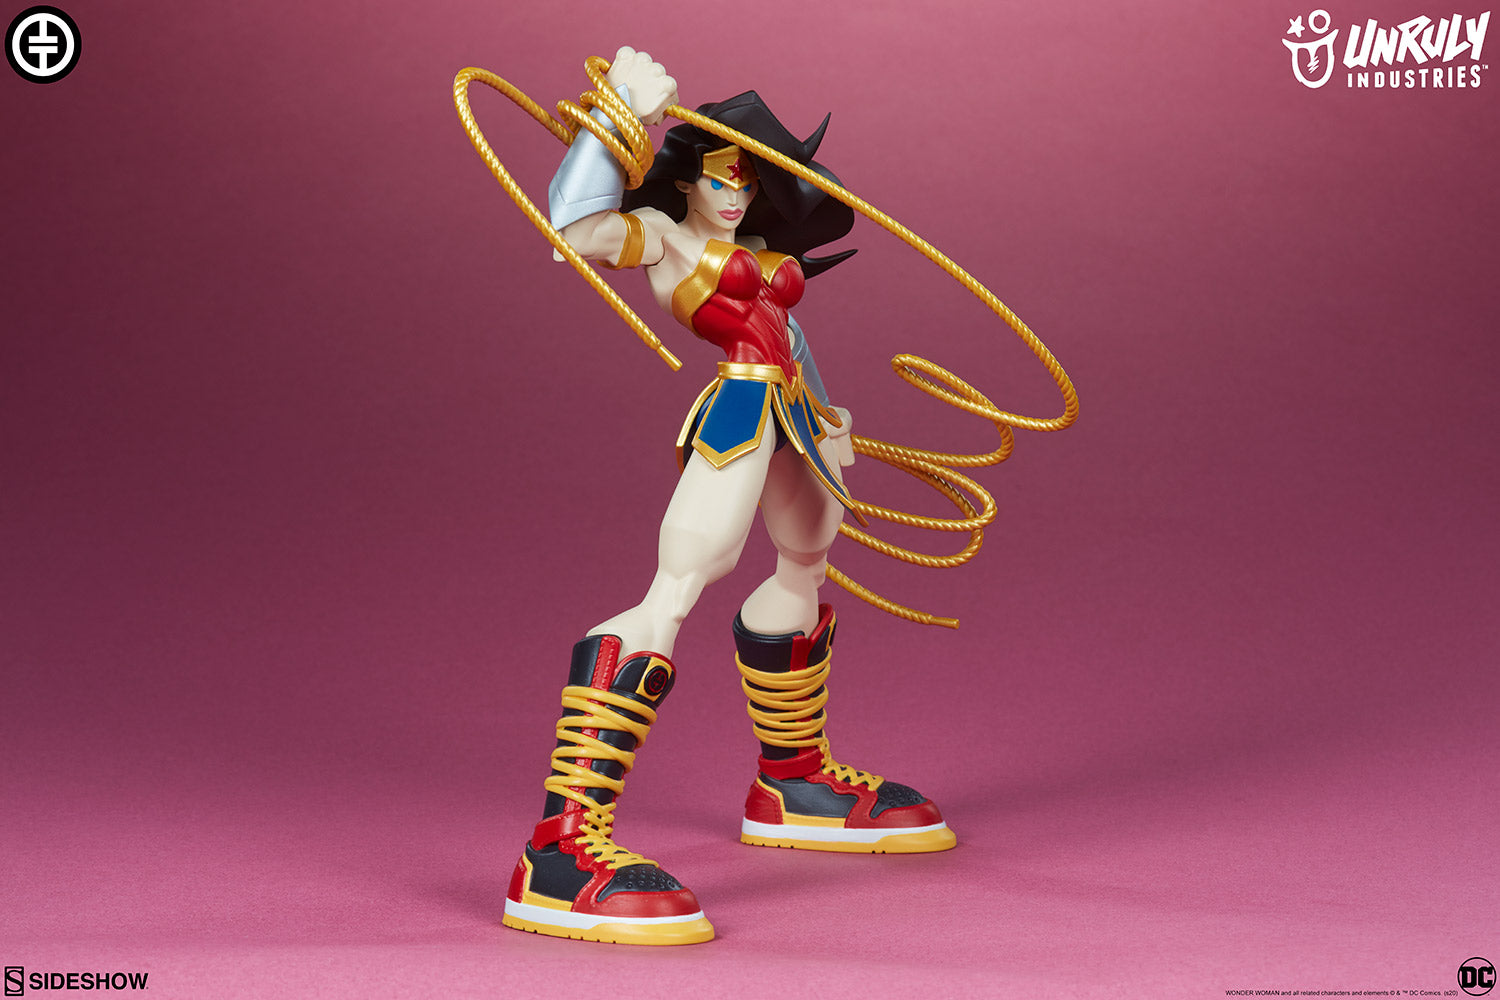 Sideshow Collectibles - Unruly Industries - Wonder Woman